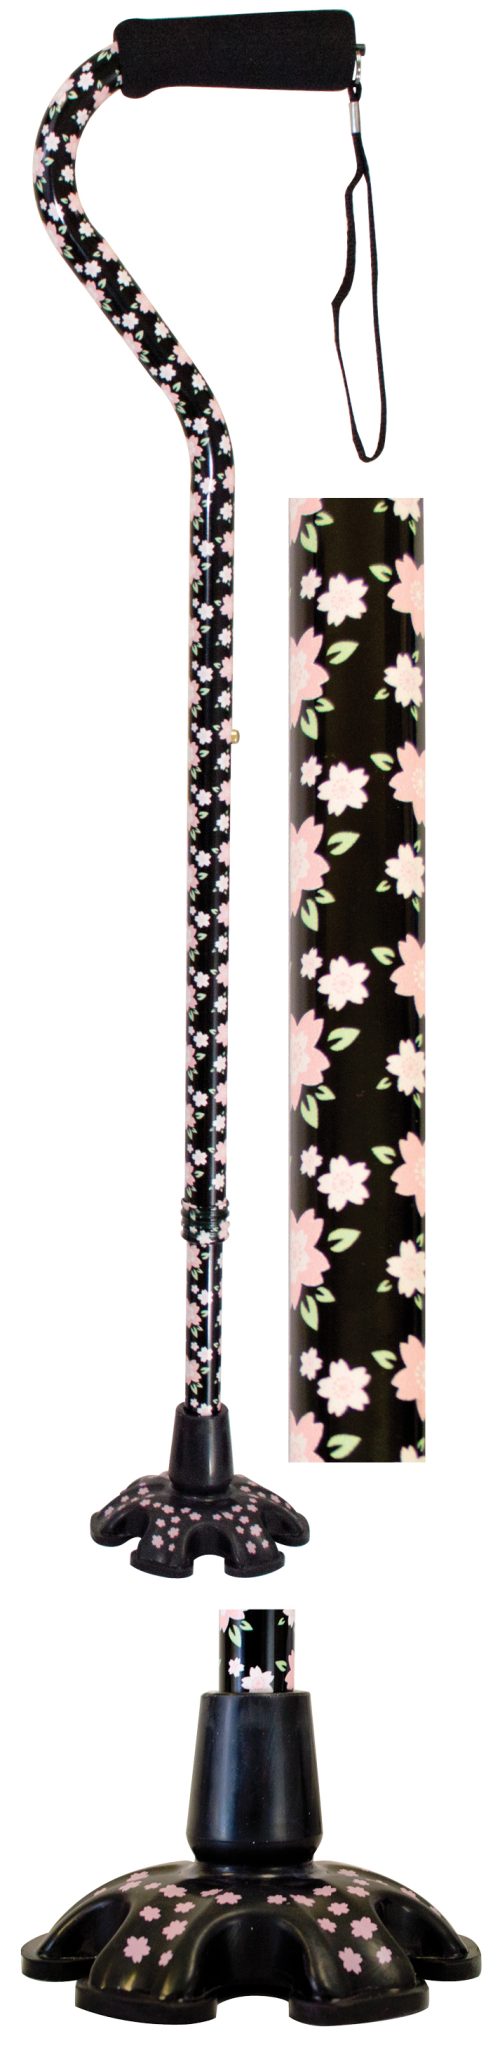 COUTURE OFFSET CANES WITH MATCHING STANDING TIPS IN PINK FLORAL